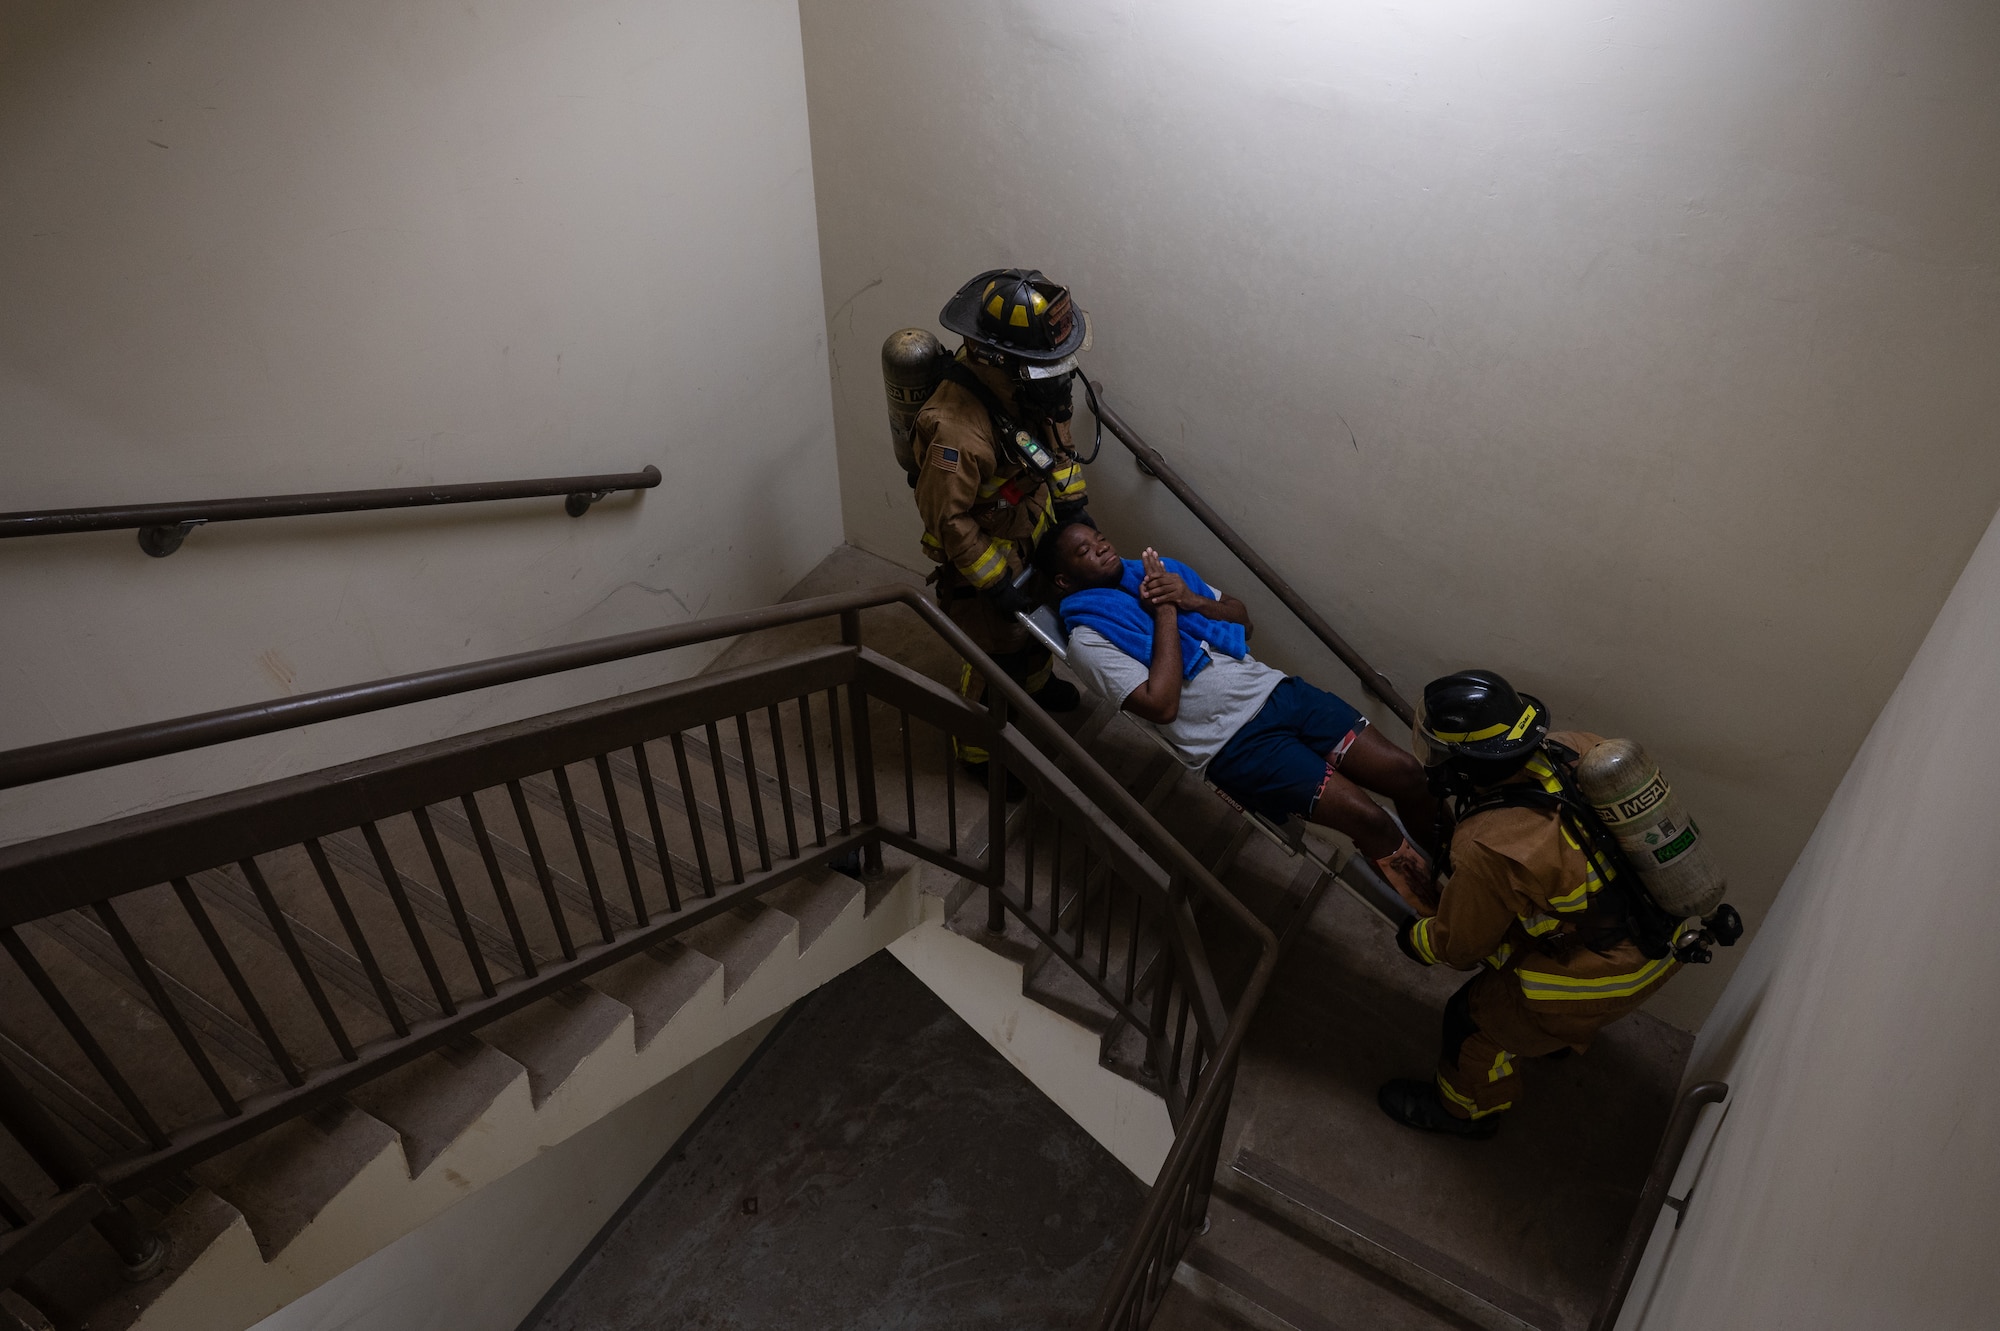 8th Civil Engineer Squadron firefighters, carry a simulated patient up the stairs during a mass casualty training event at Kunsan Air Base